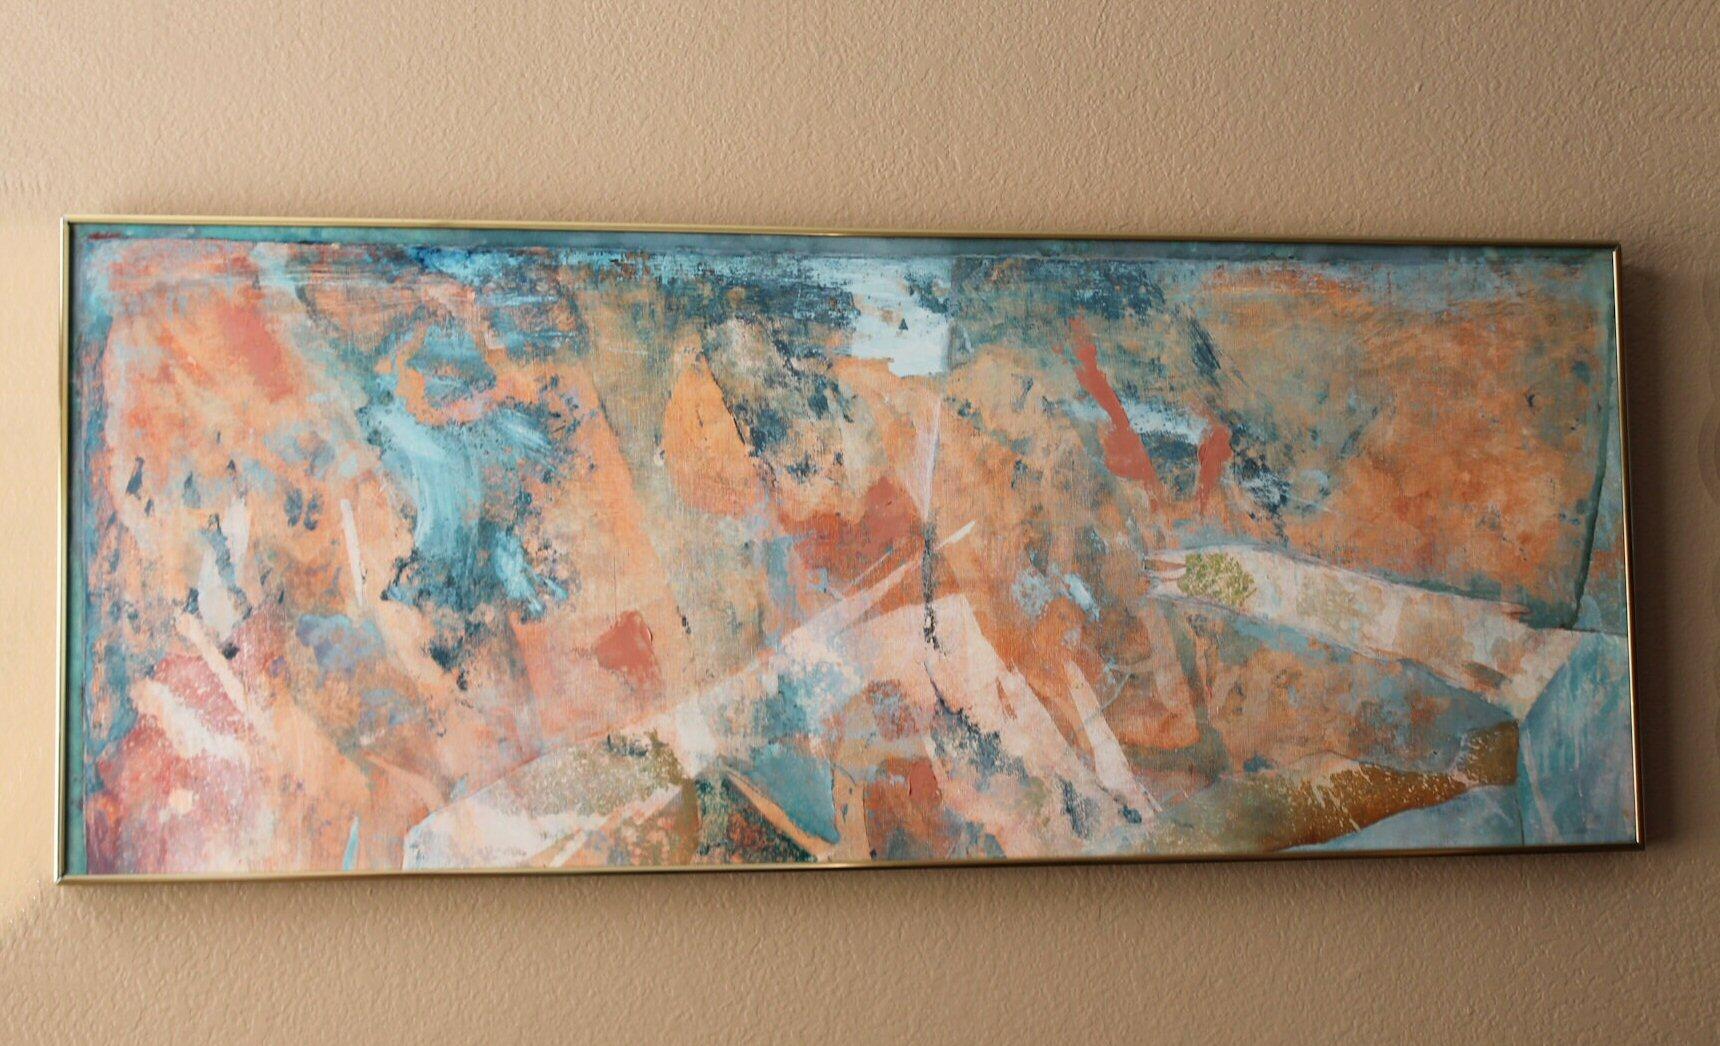 Magnificent!  

MID CENTURY ABSTRACT
ORIGINAL OIL PAINTING

STUNNING ORANGE & BLUE PALETTE!

After Gio Ponti

Offered is an absolutely superb original oil painting of huge proportions (24x60) for interior spaces that need a monumental work of